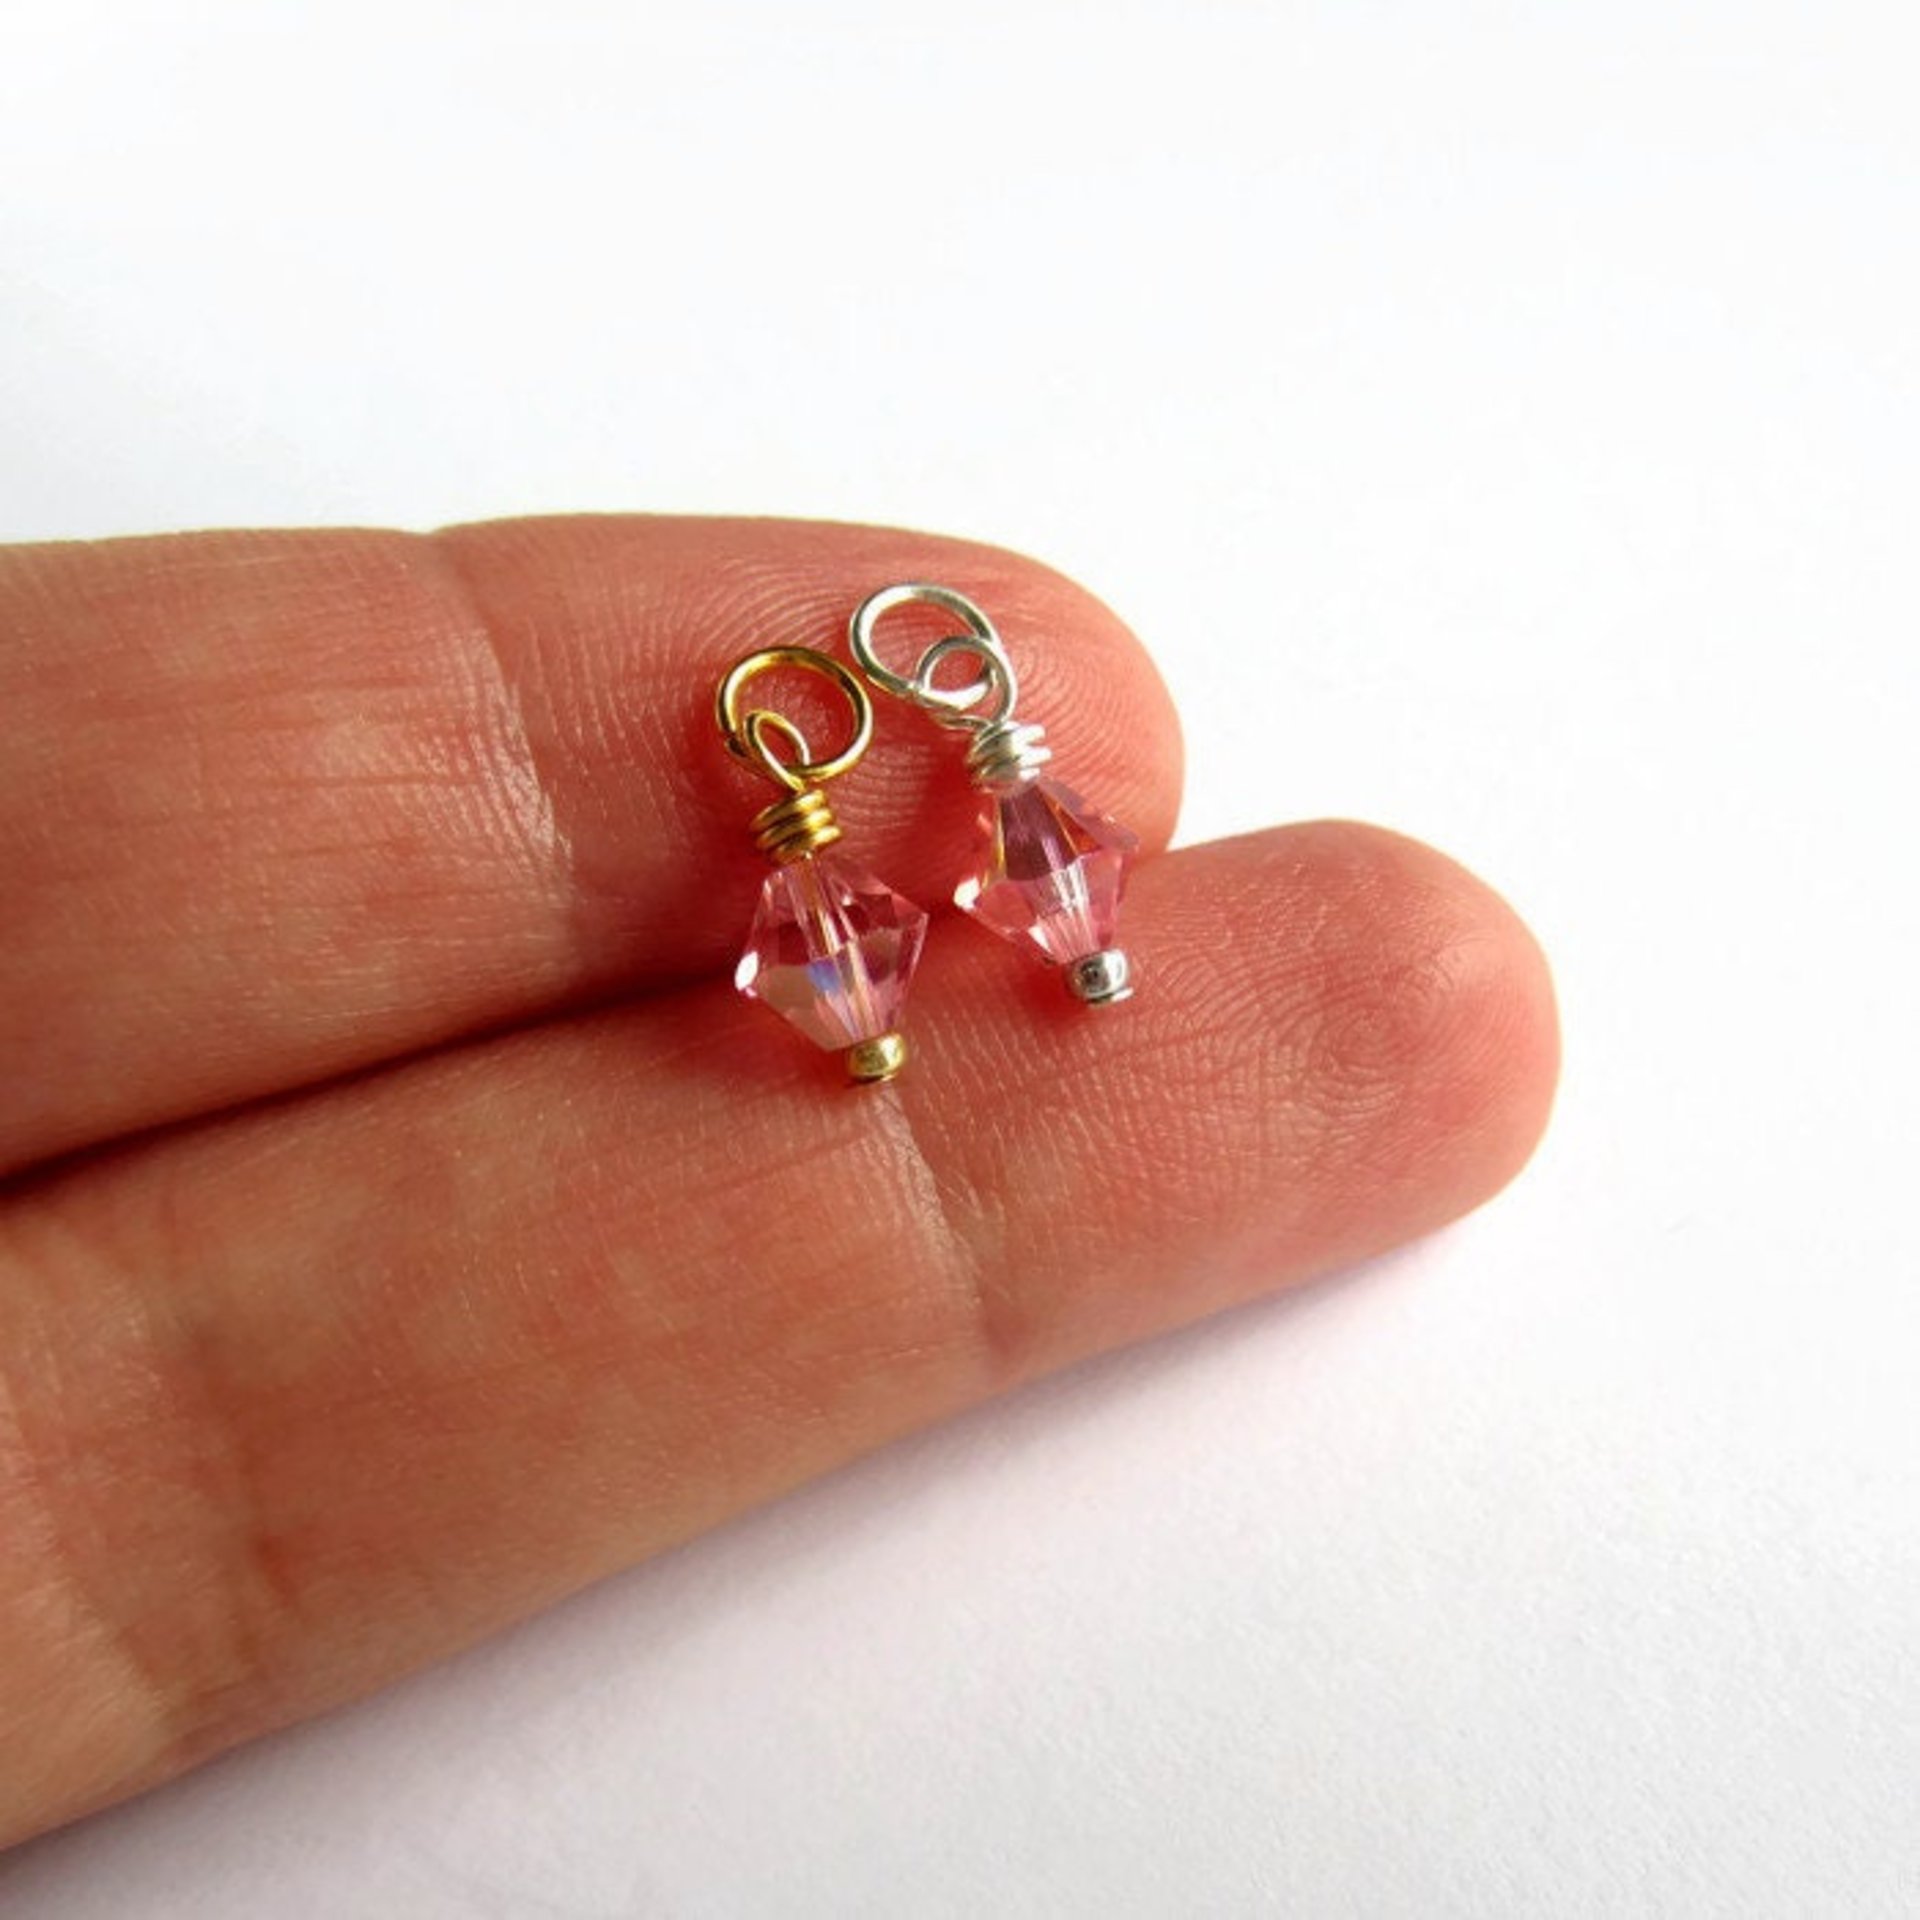 Light Rose AB Pink Crystal Wire Wrapped Charm ~ Handmade by The Tiny Tree Frog Jewellery